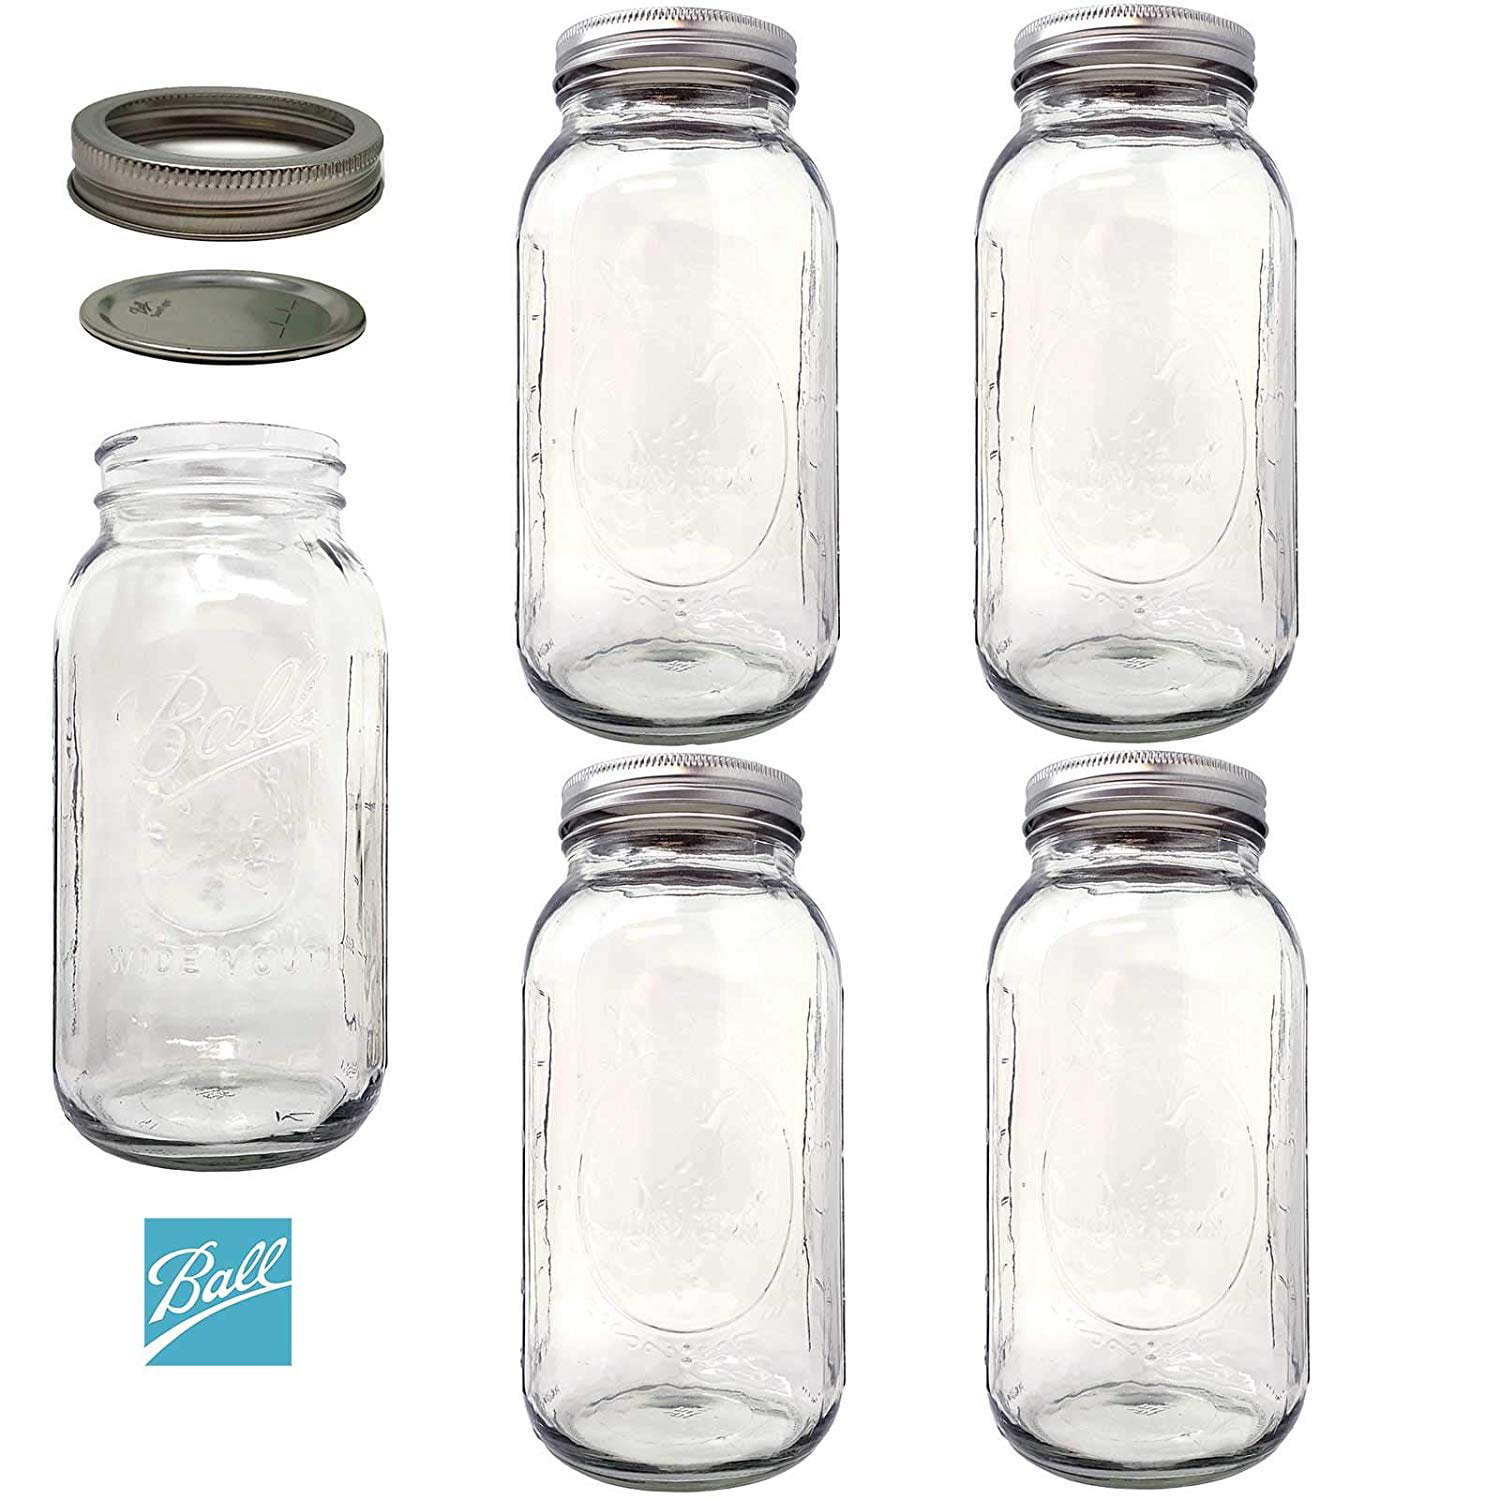 2 Pack,6 Count Ball Glass Mason Jar W/Lid & Band Wide Mouth 64 Ounces,